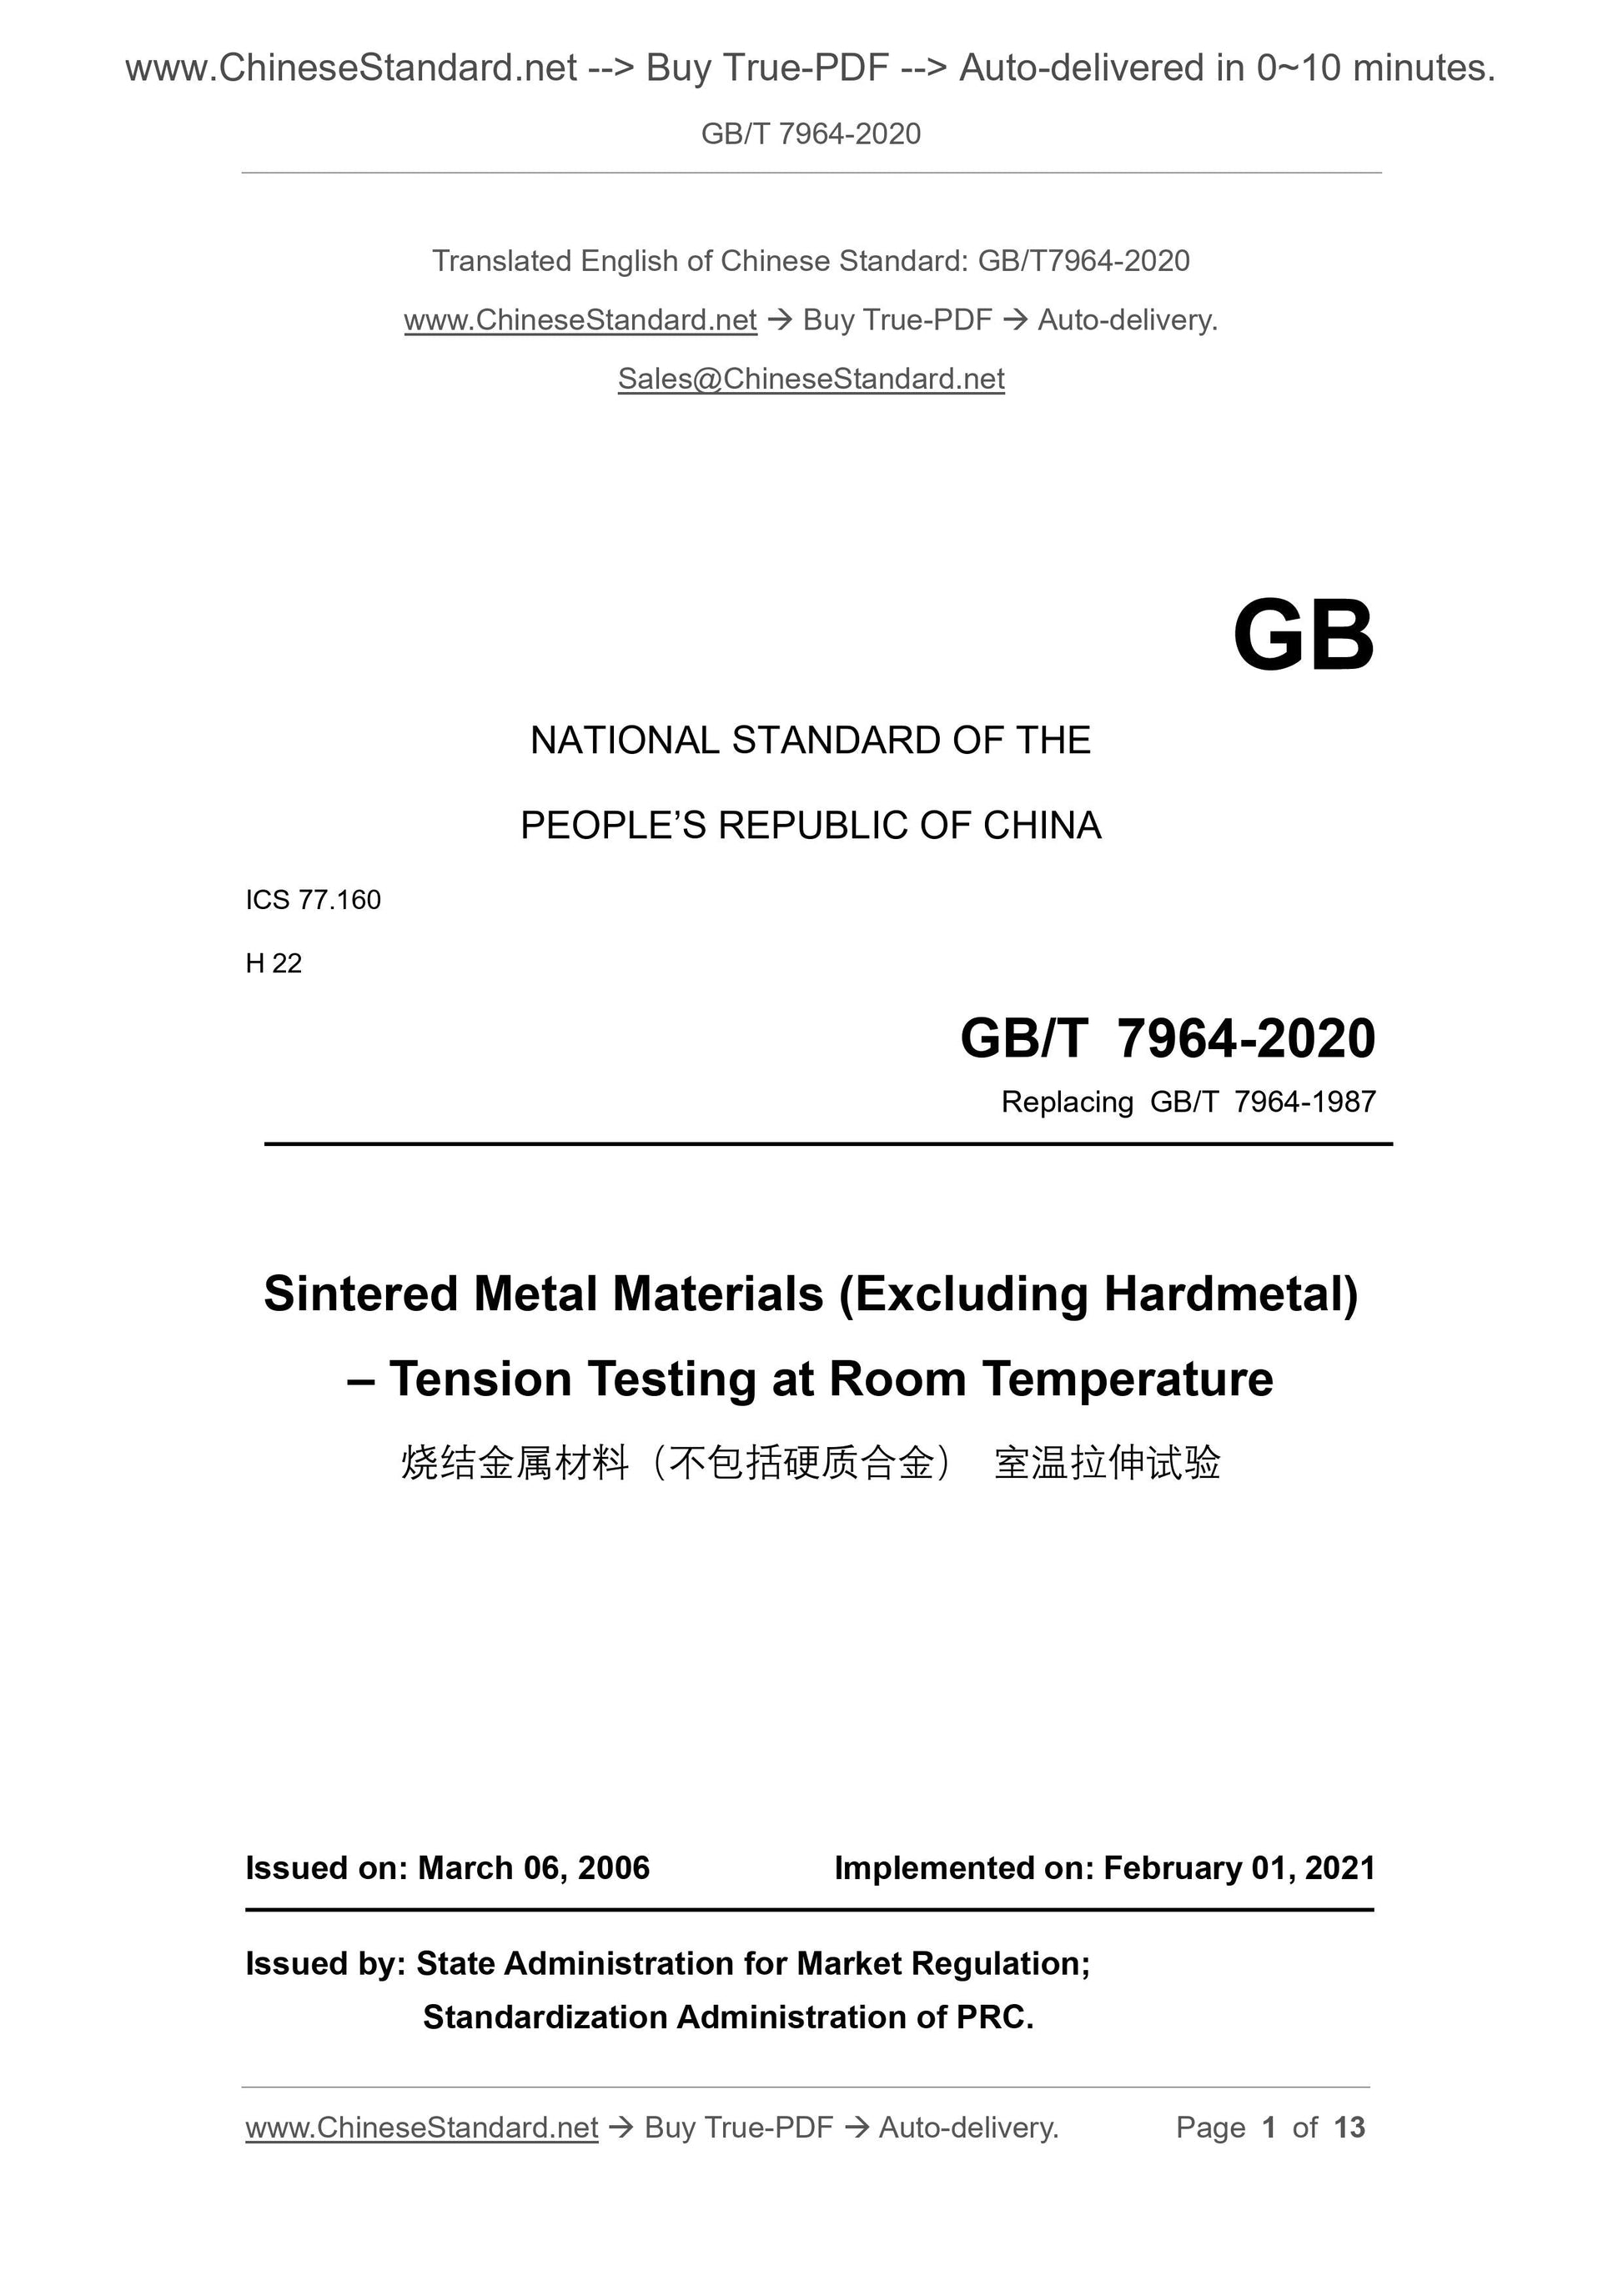 GB/T 7964-2020 Page 1